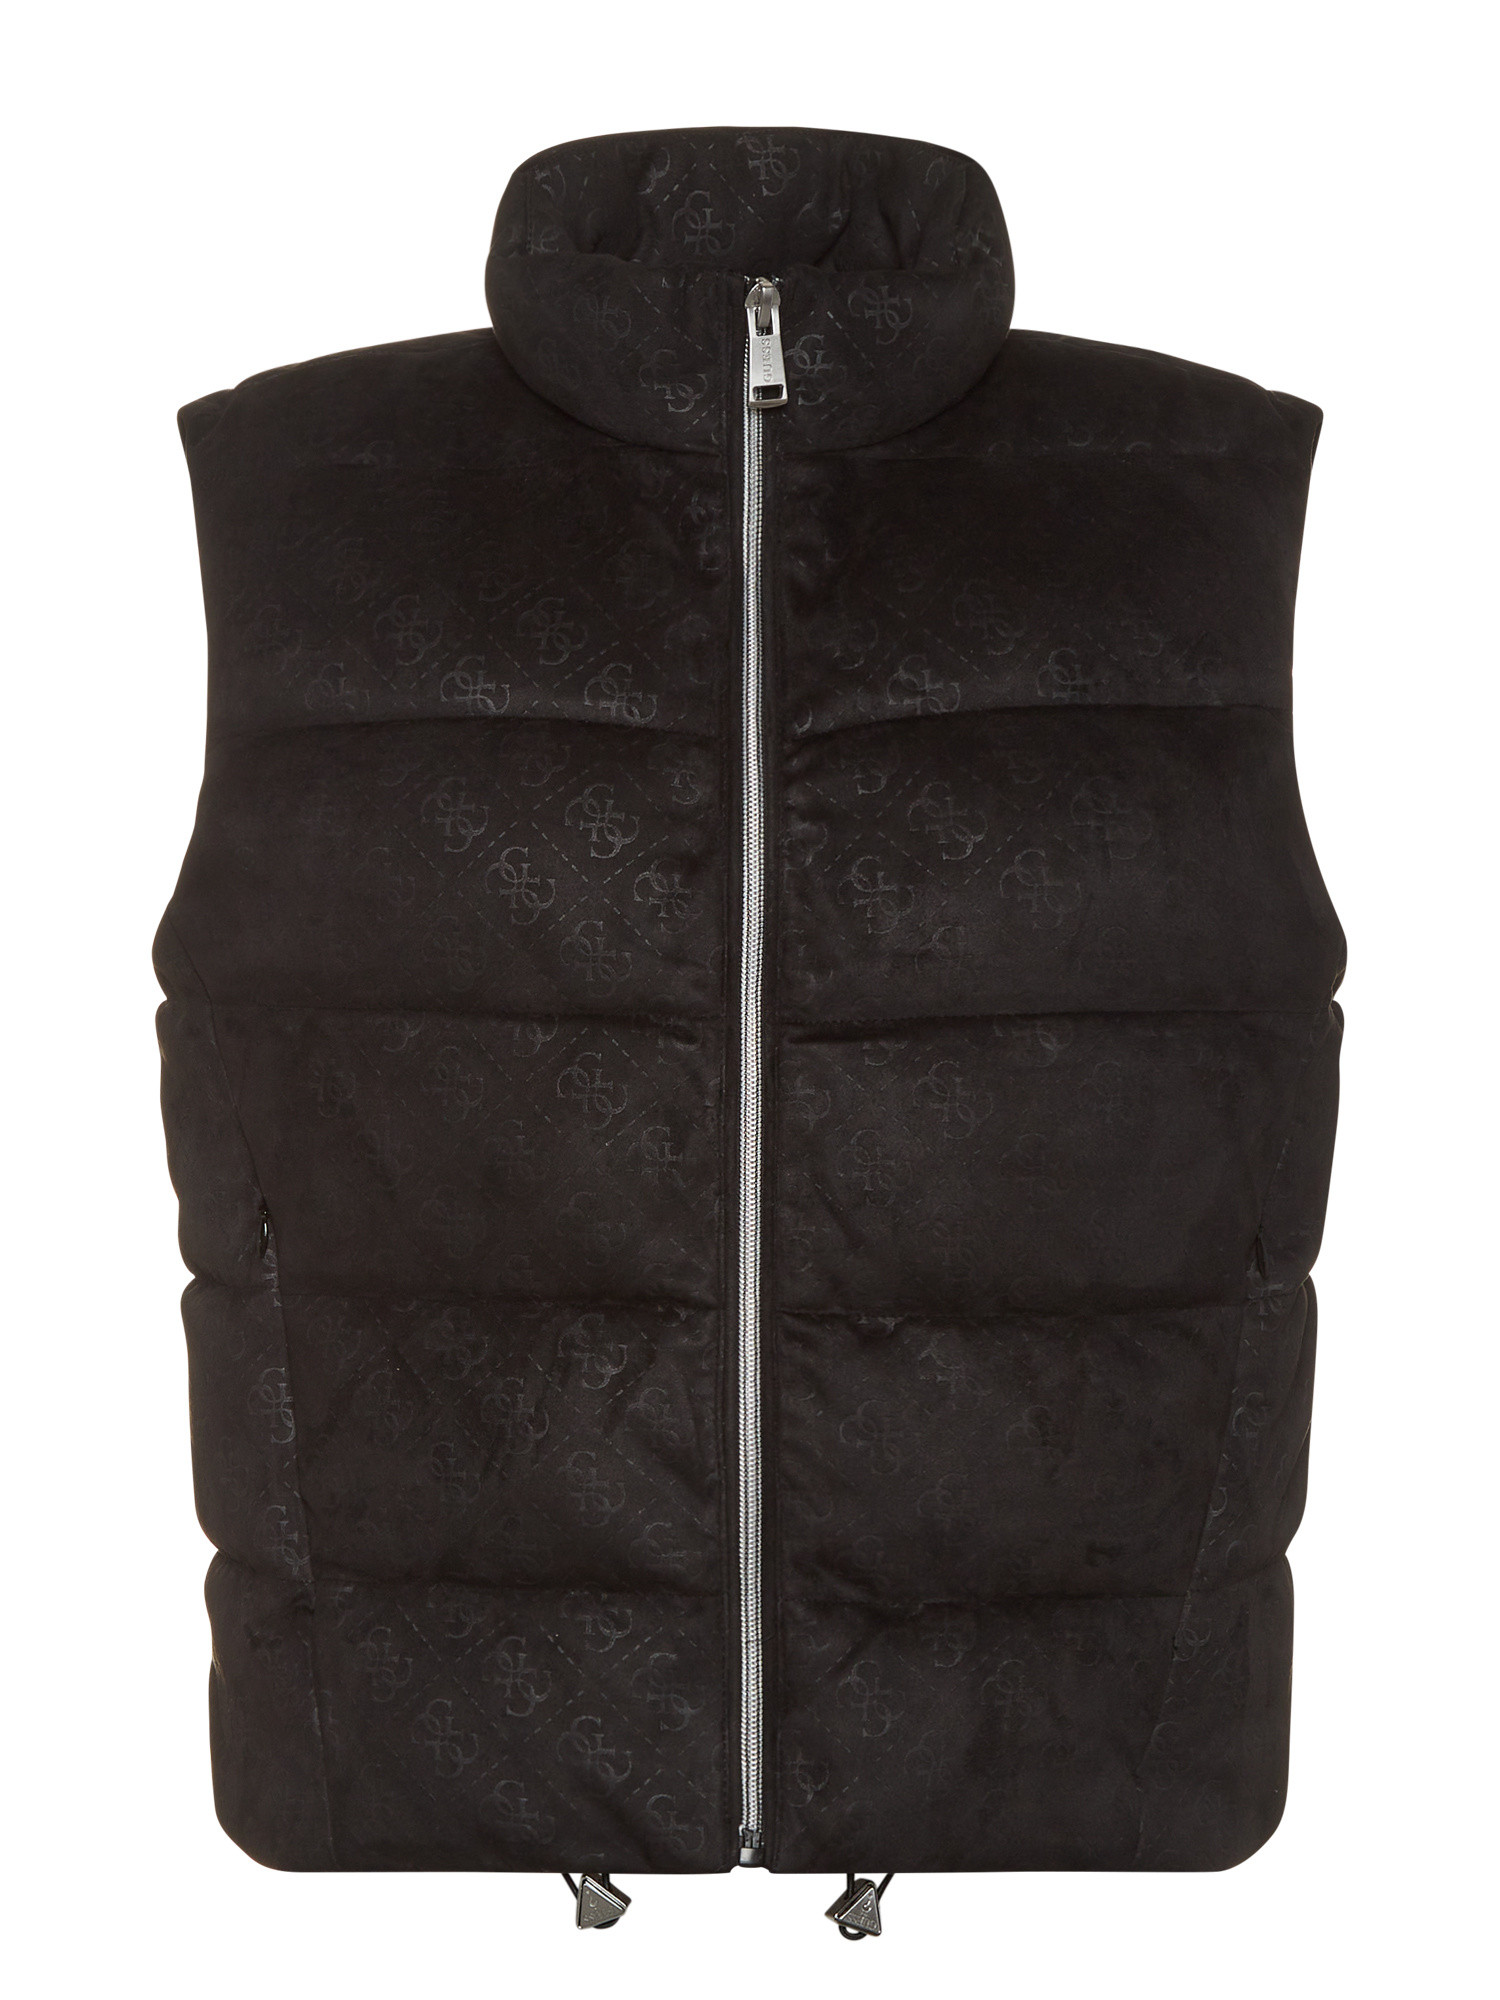 Guess - Down jacket with logo, Black, large image number 0